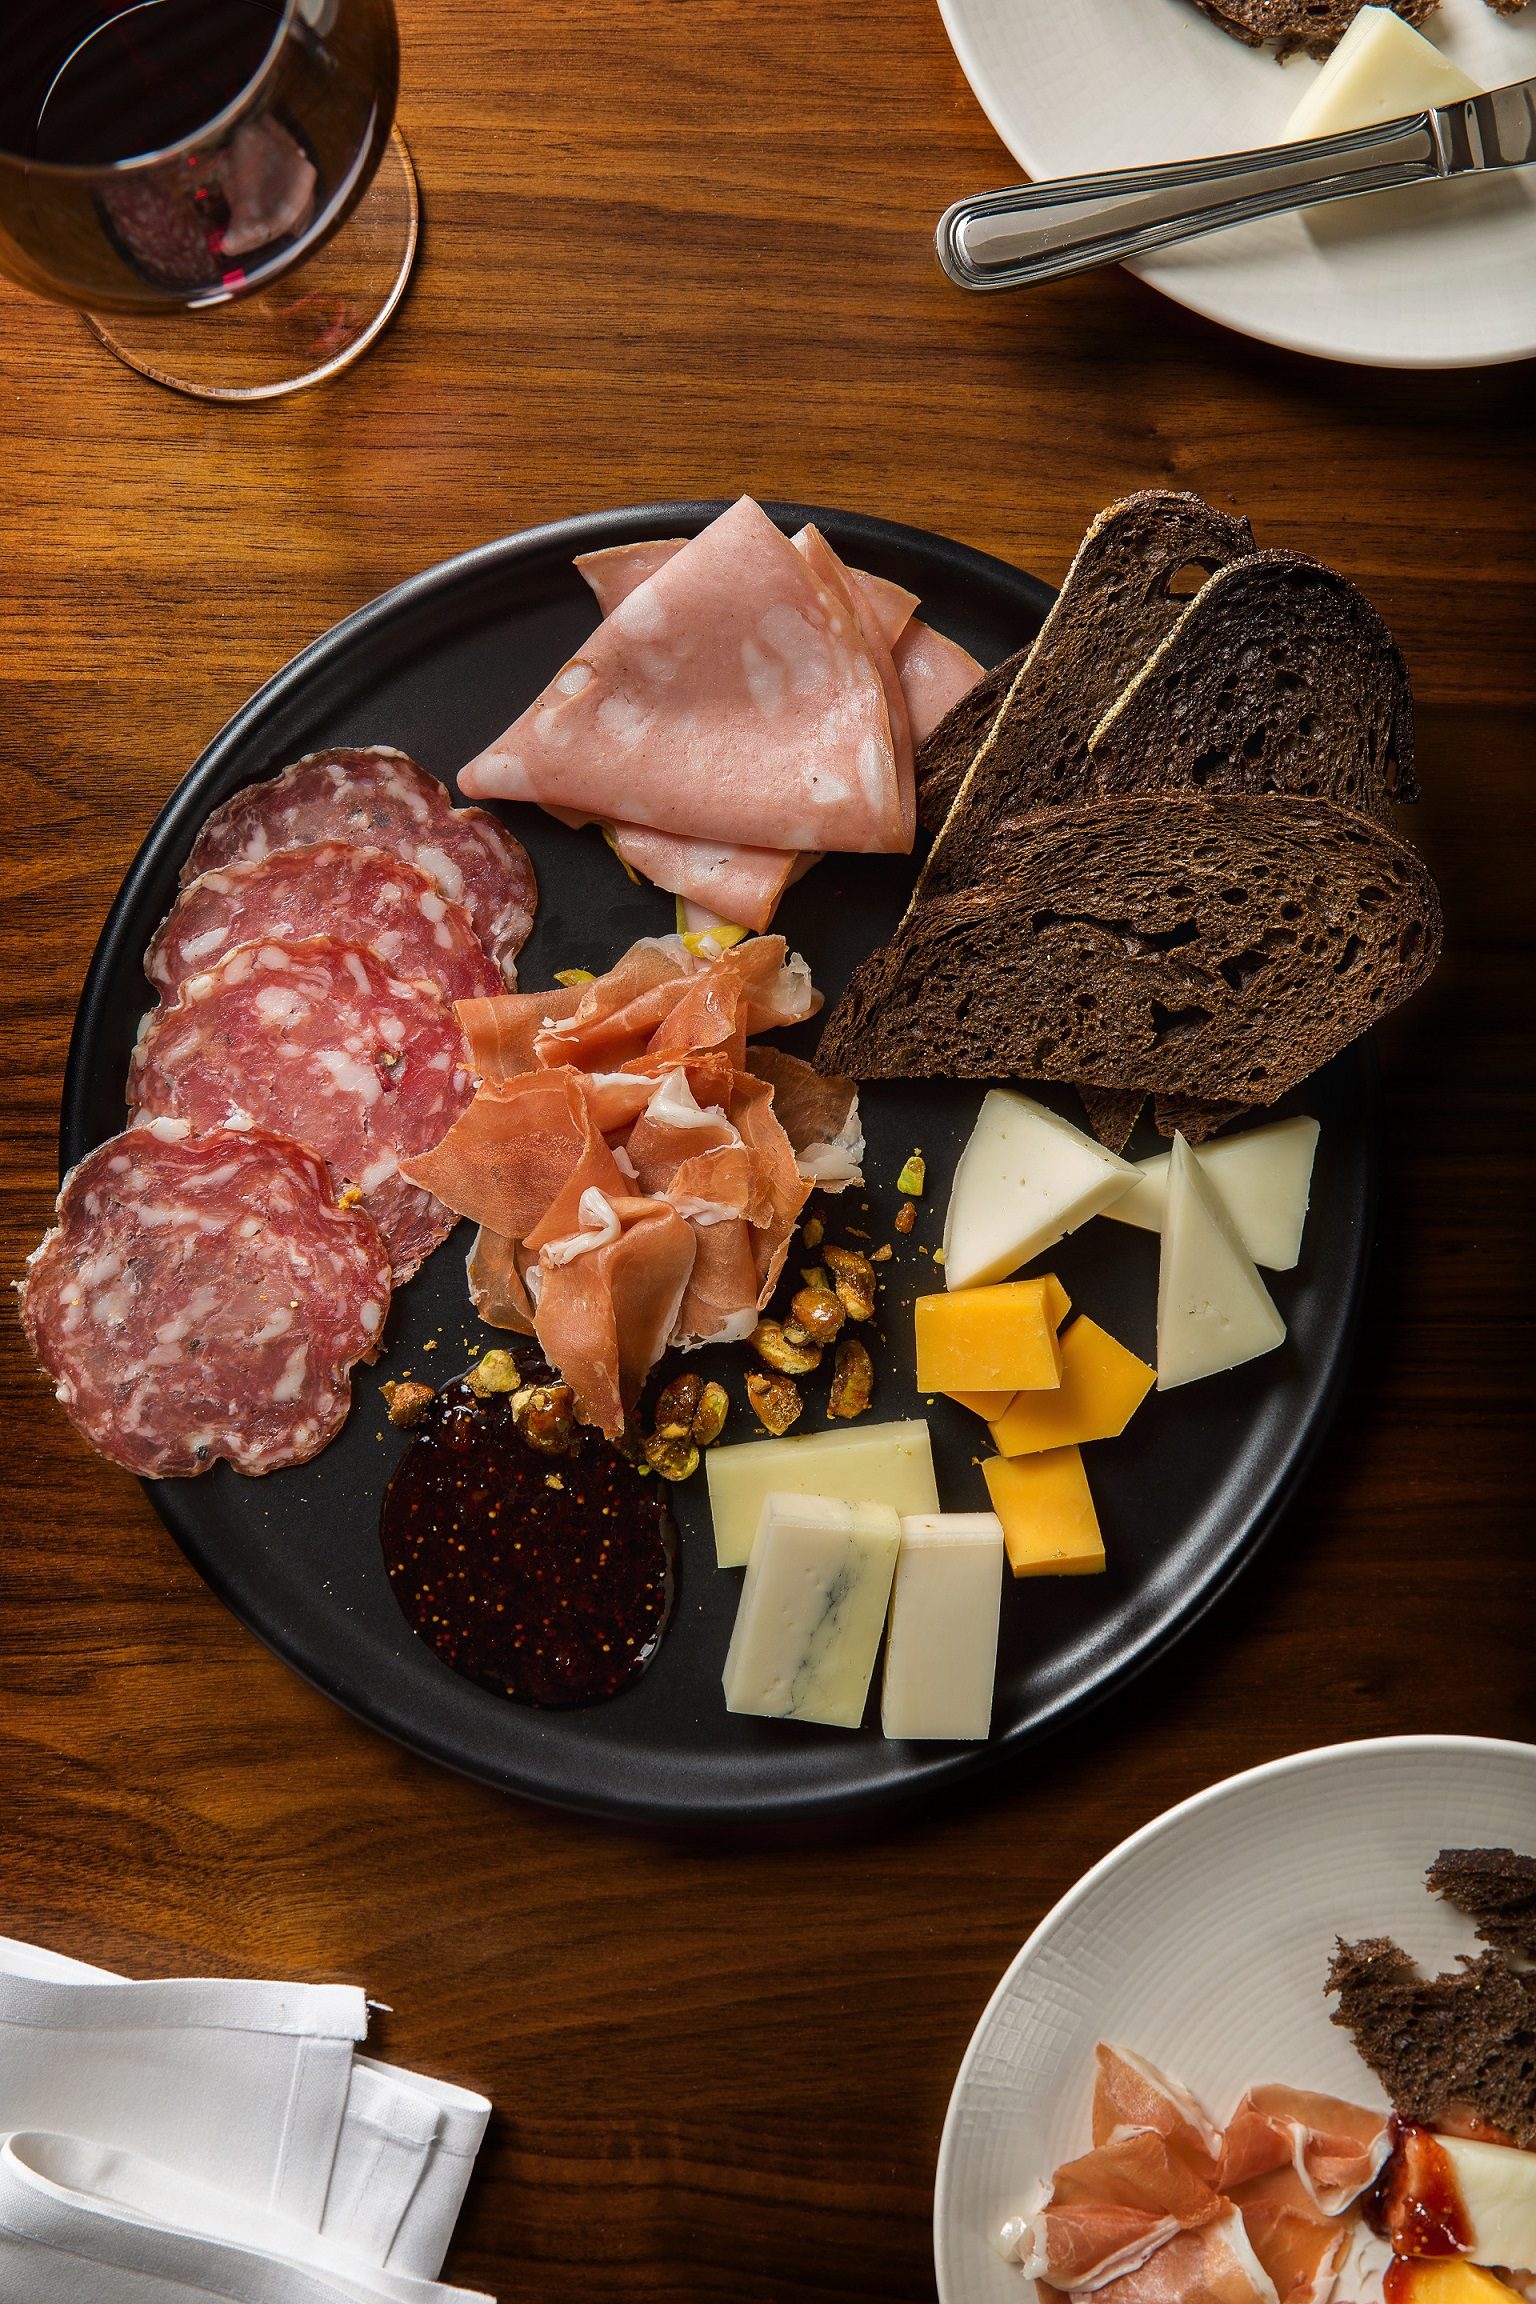 HEXX Cheese & Charcuterie Plate by Anthony Mair